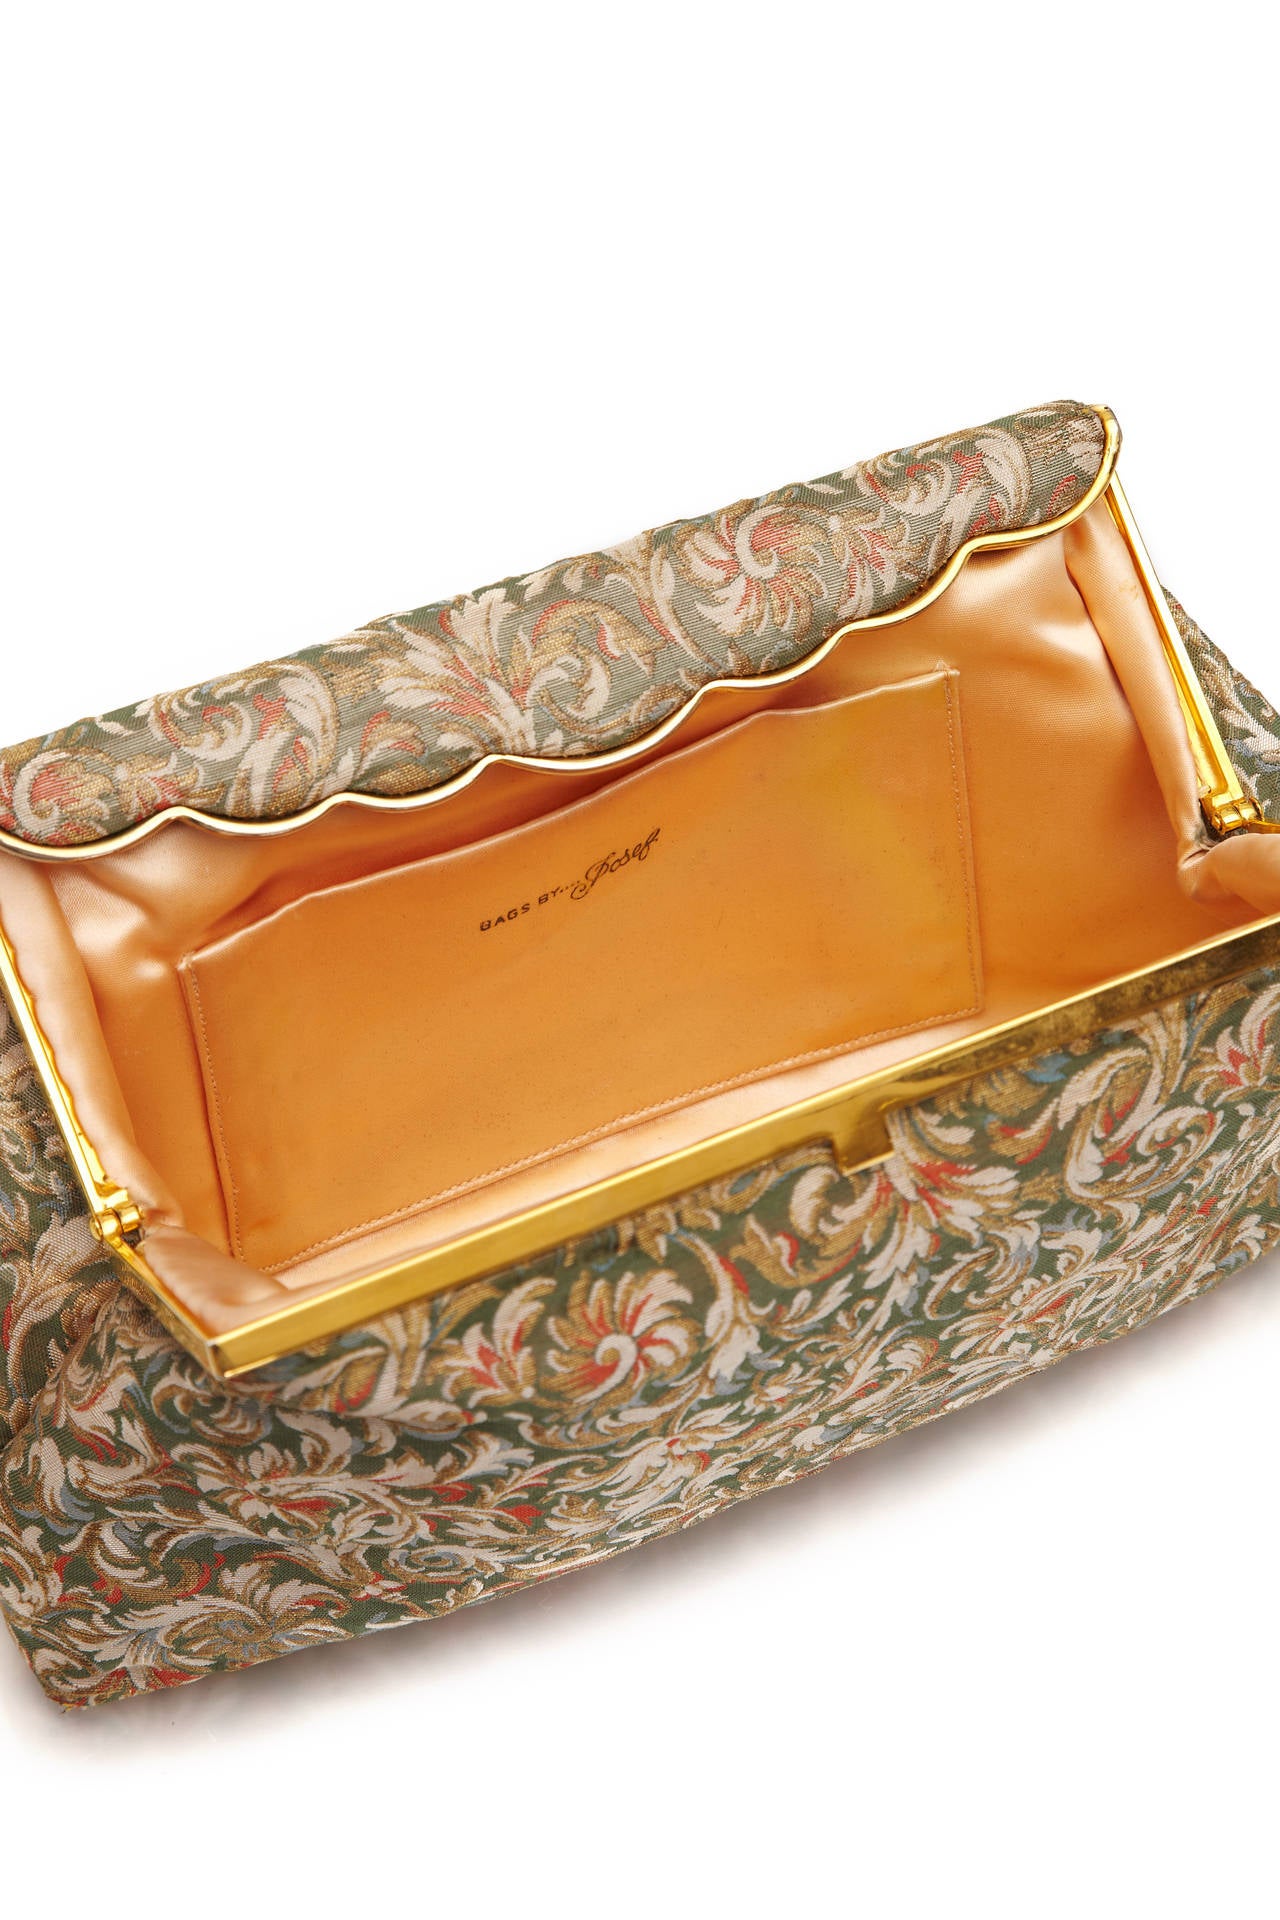 Gorgeous little brocade clutch bag with pretty swirling floral pattern woven with gold lame, pale green, cream and coral. Fully lined in pale peach silk with separate, original coin purse and mirror and two extra internal pockets.  In pristine